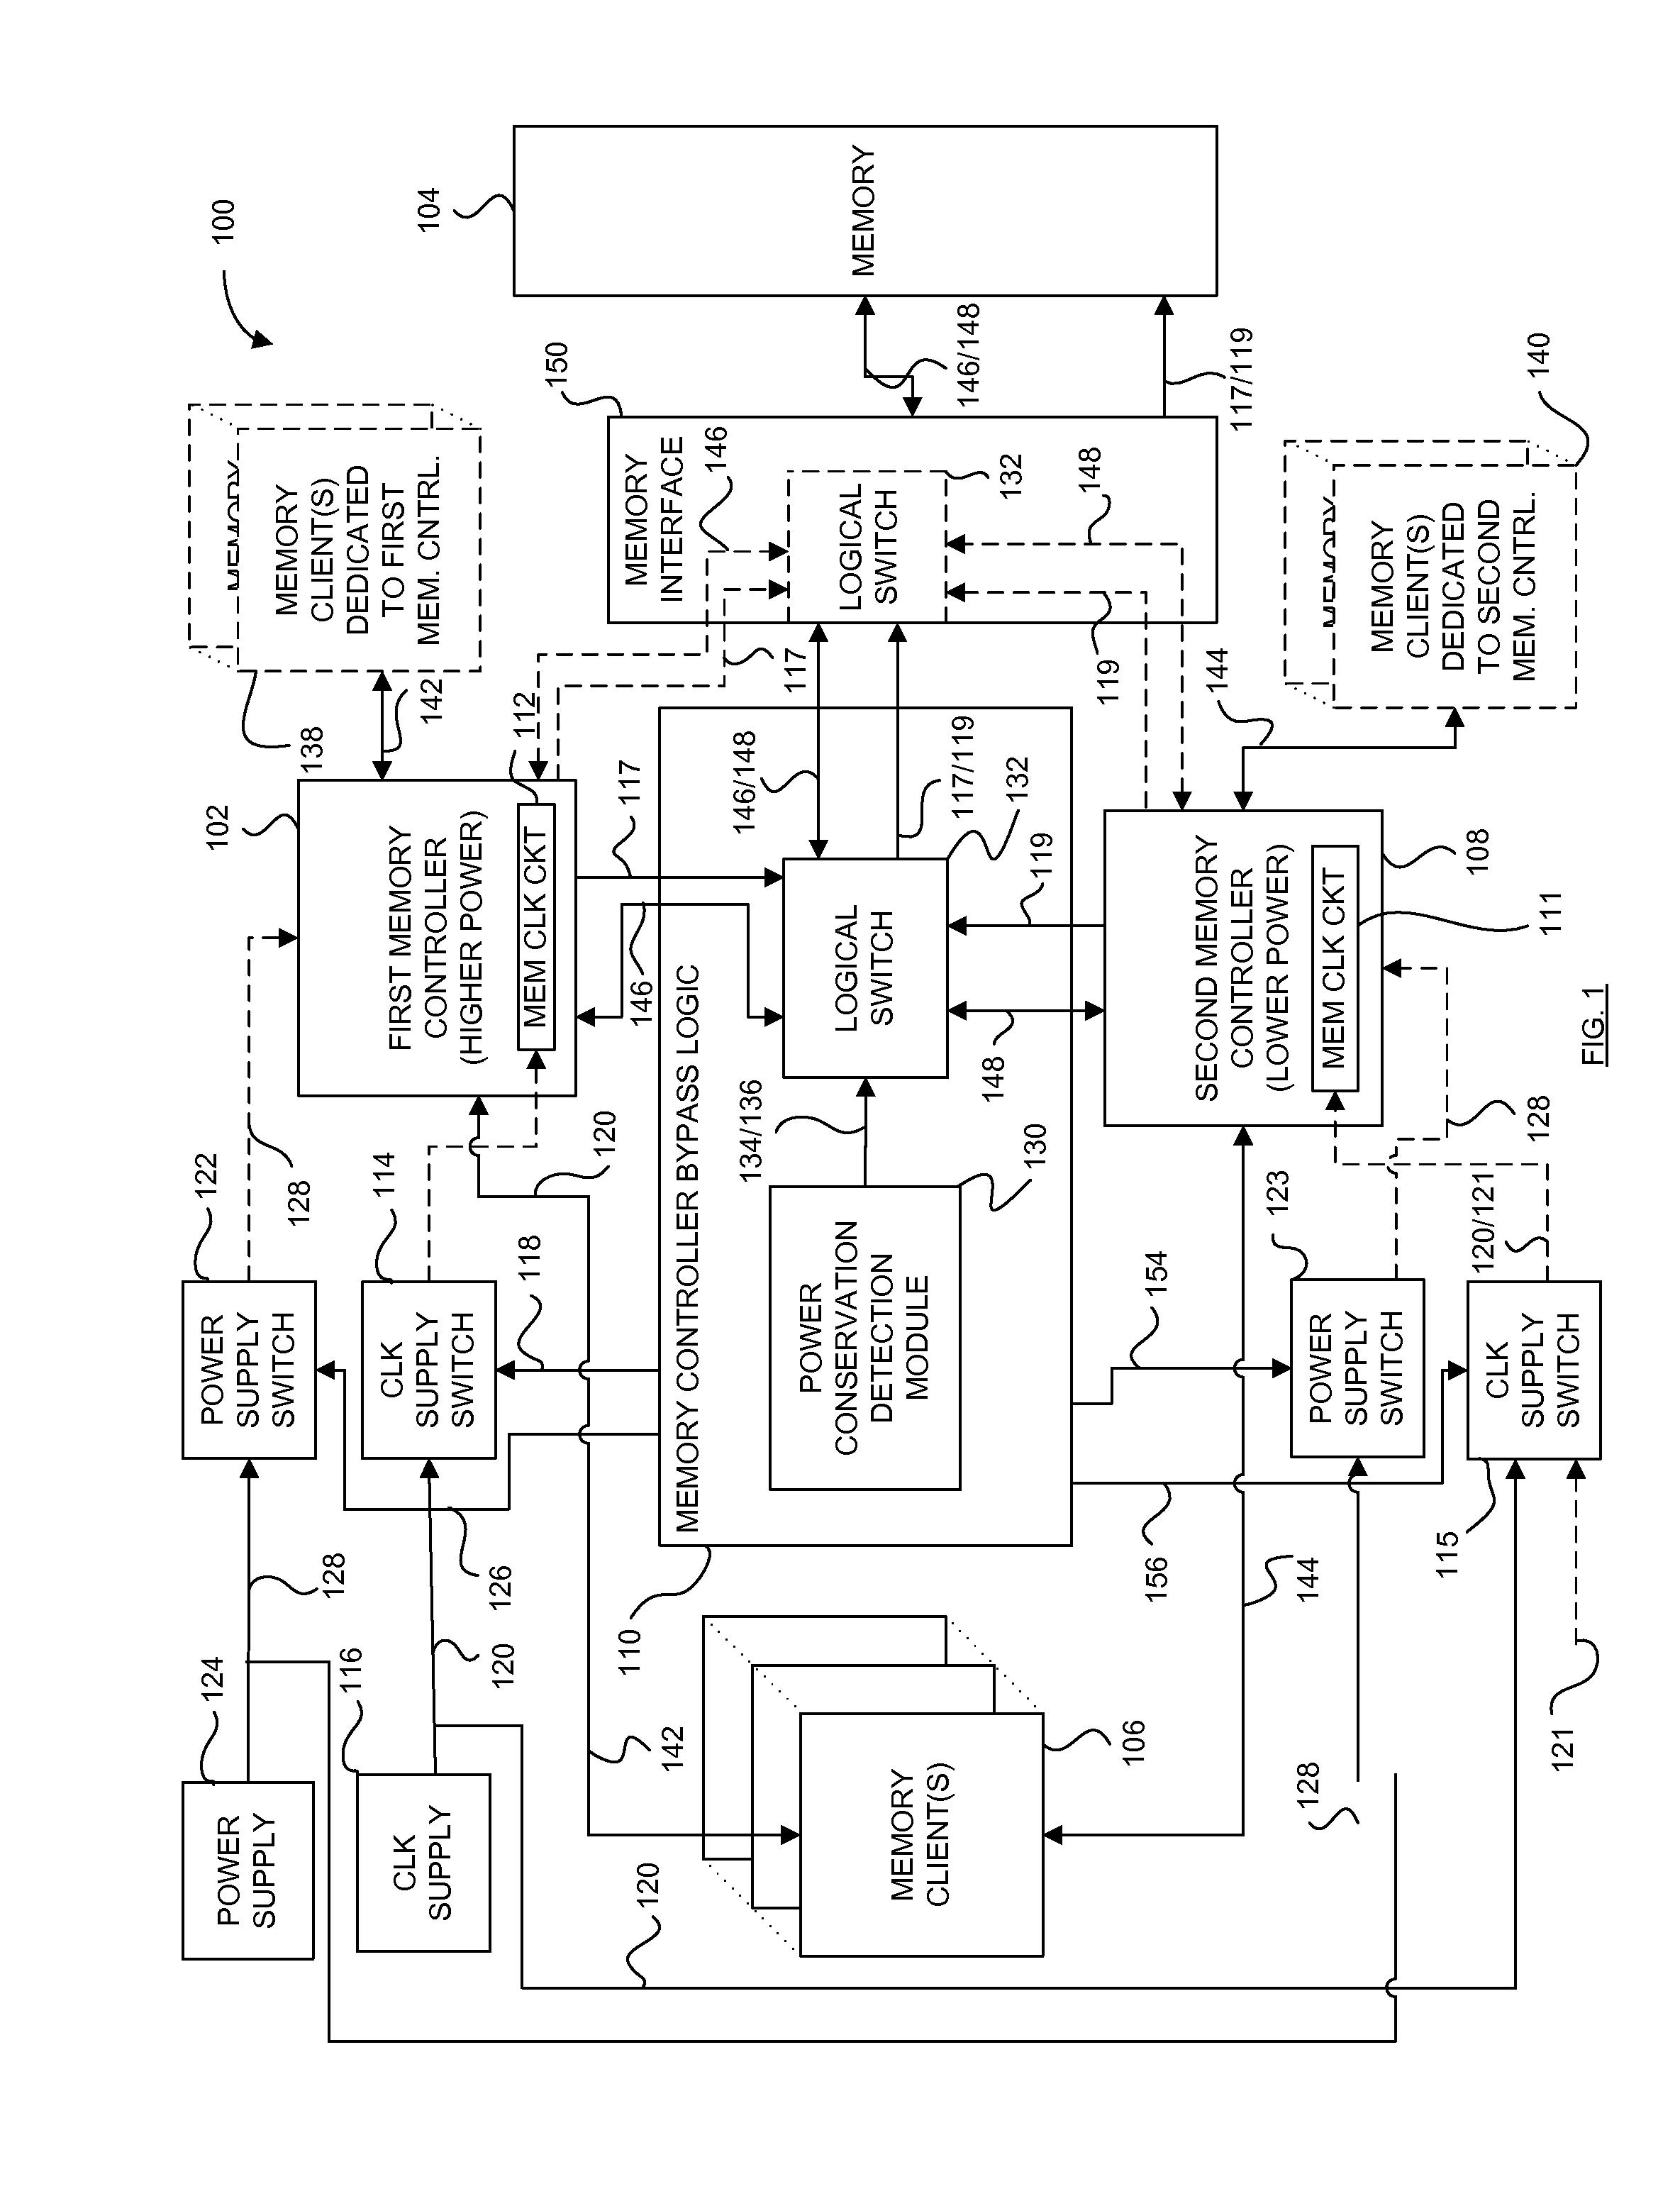 Circuits and Methods for Providing Adjustable Power Consumption